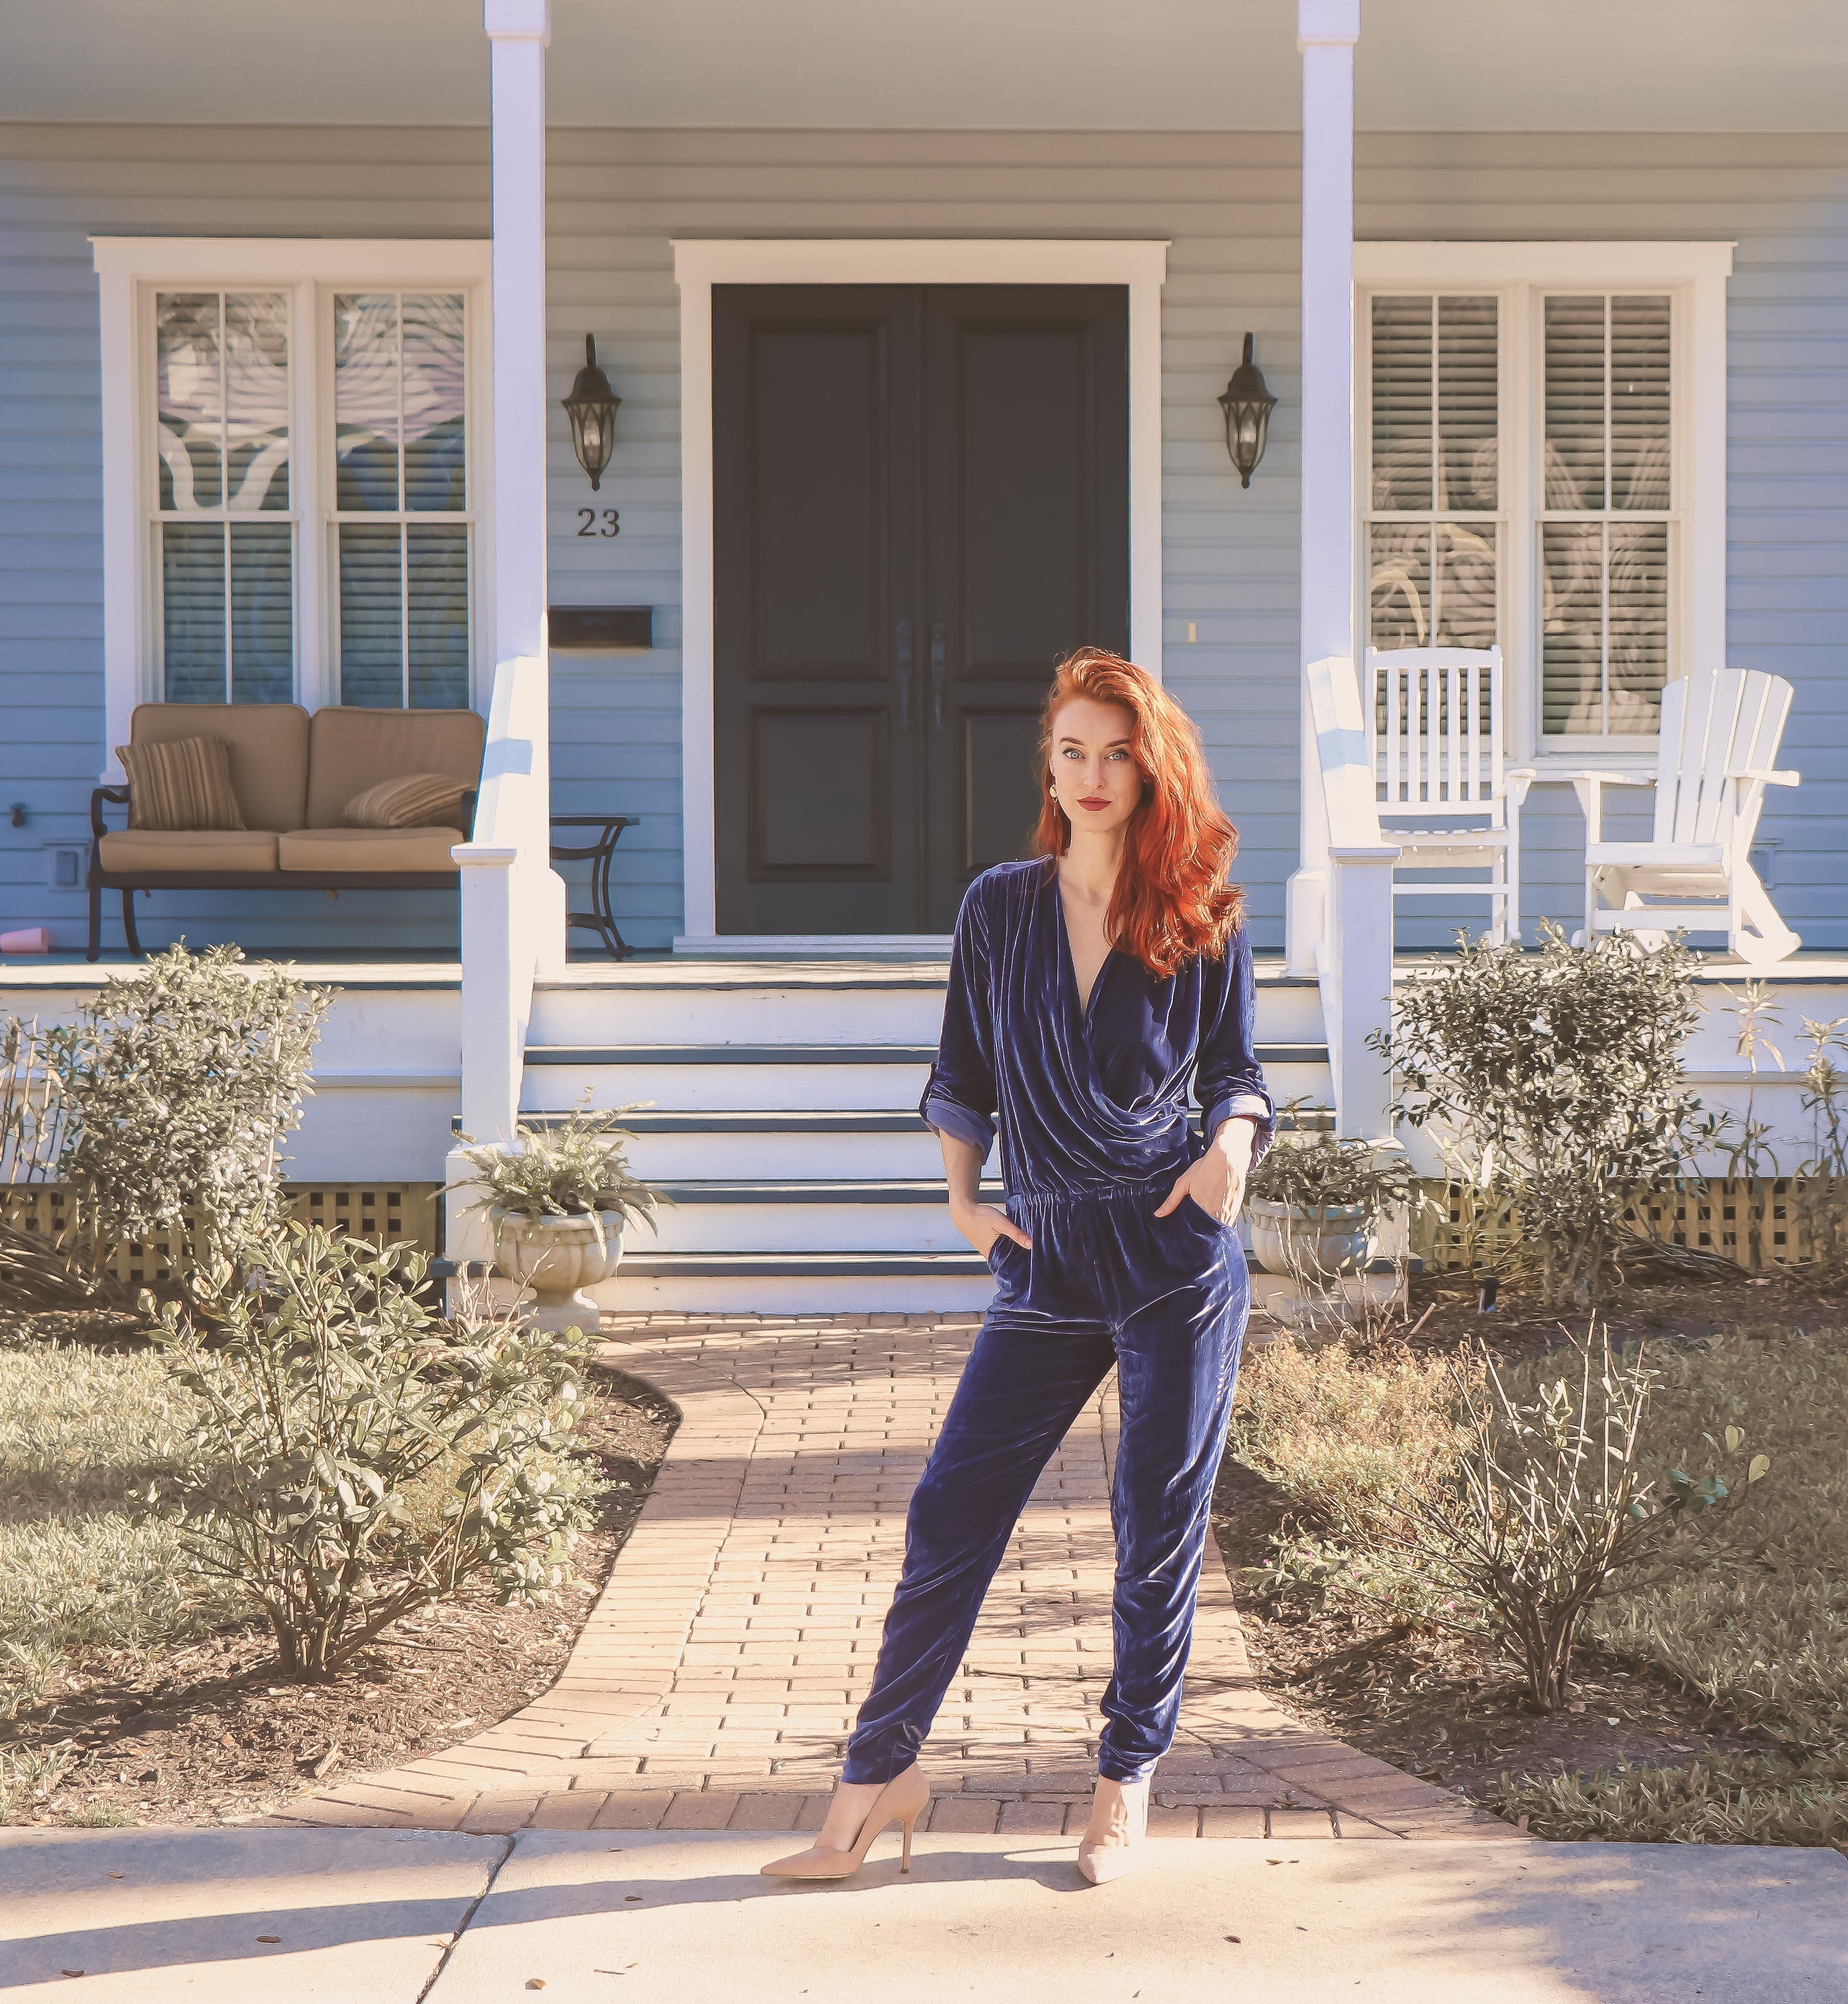 Woman wearing black jumpsuit standing near the house photo